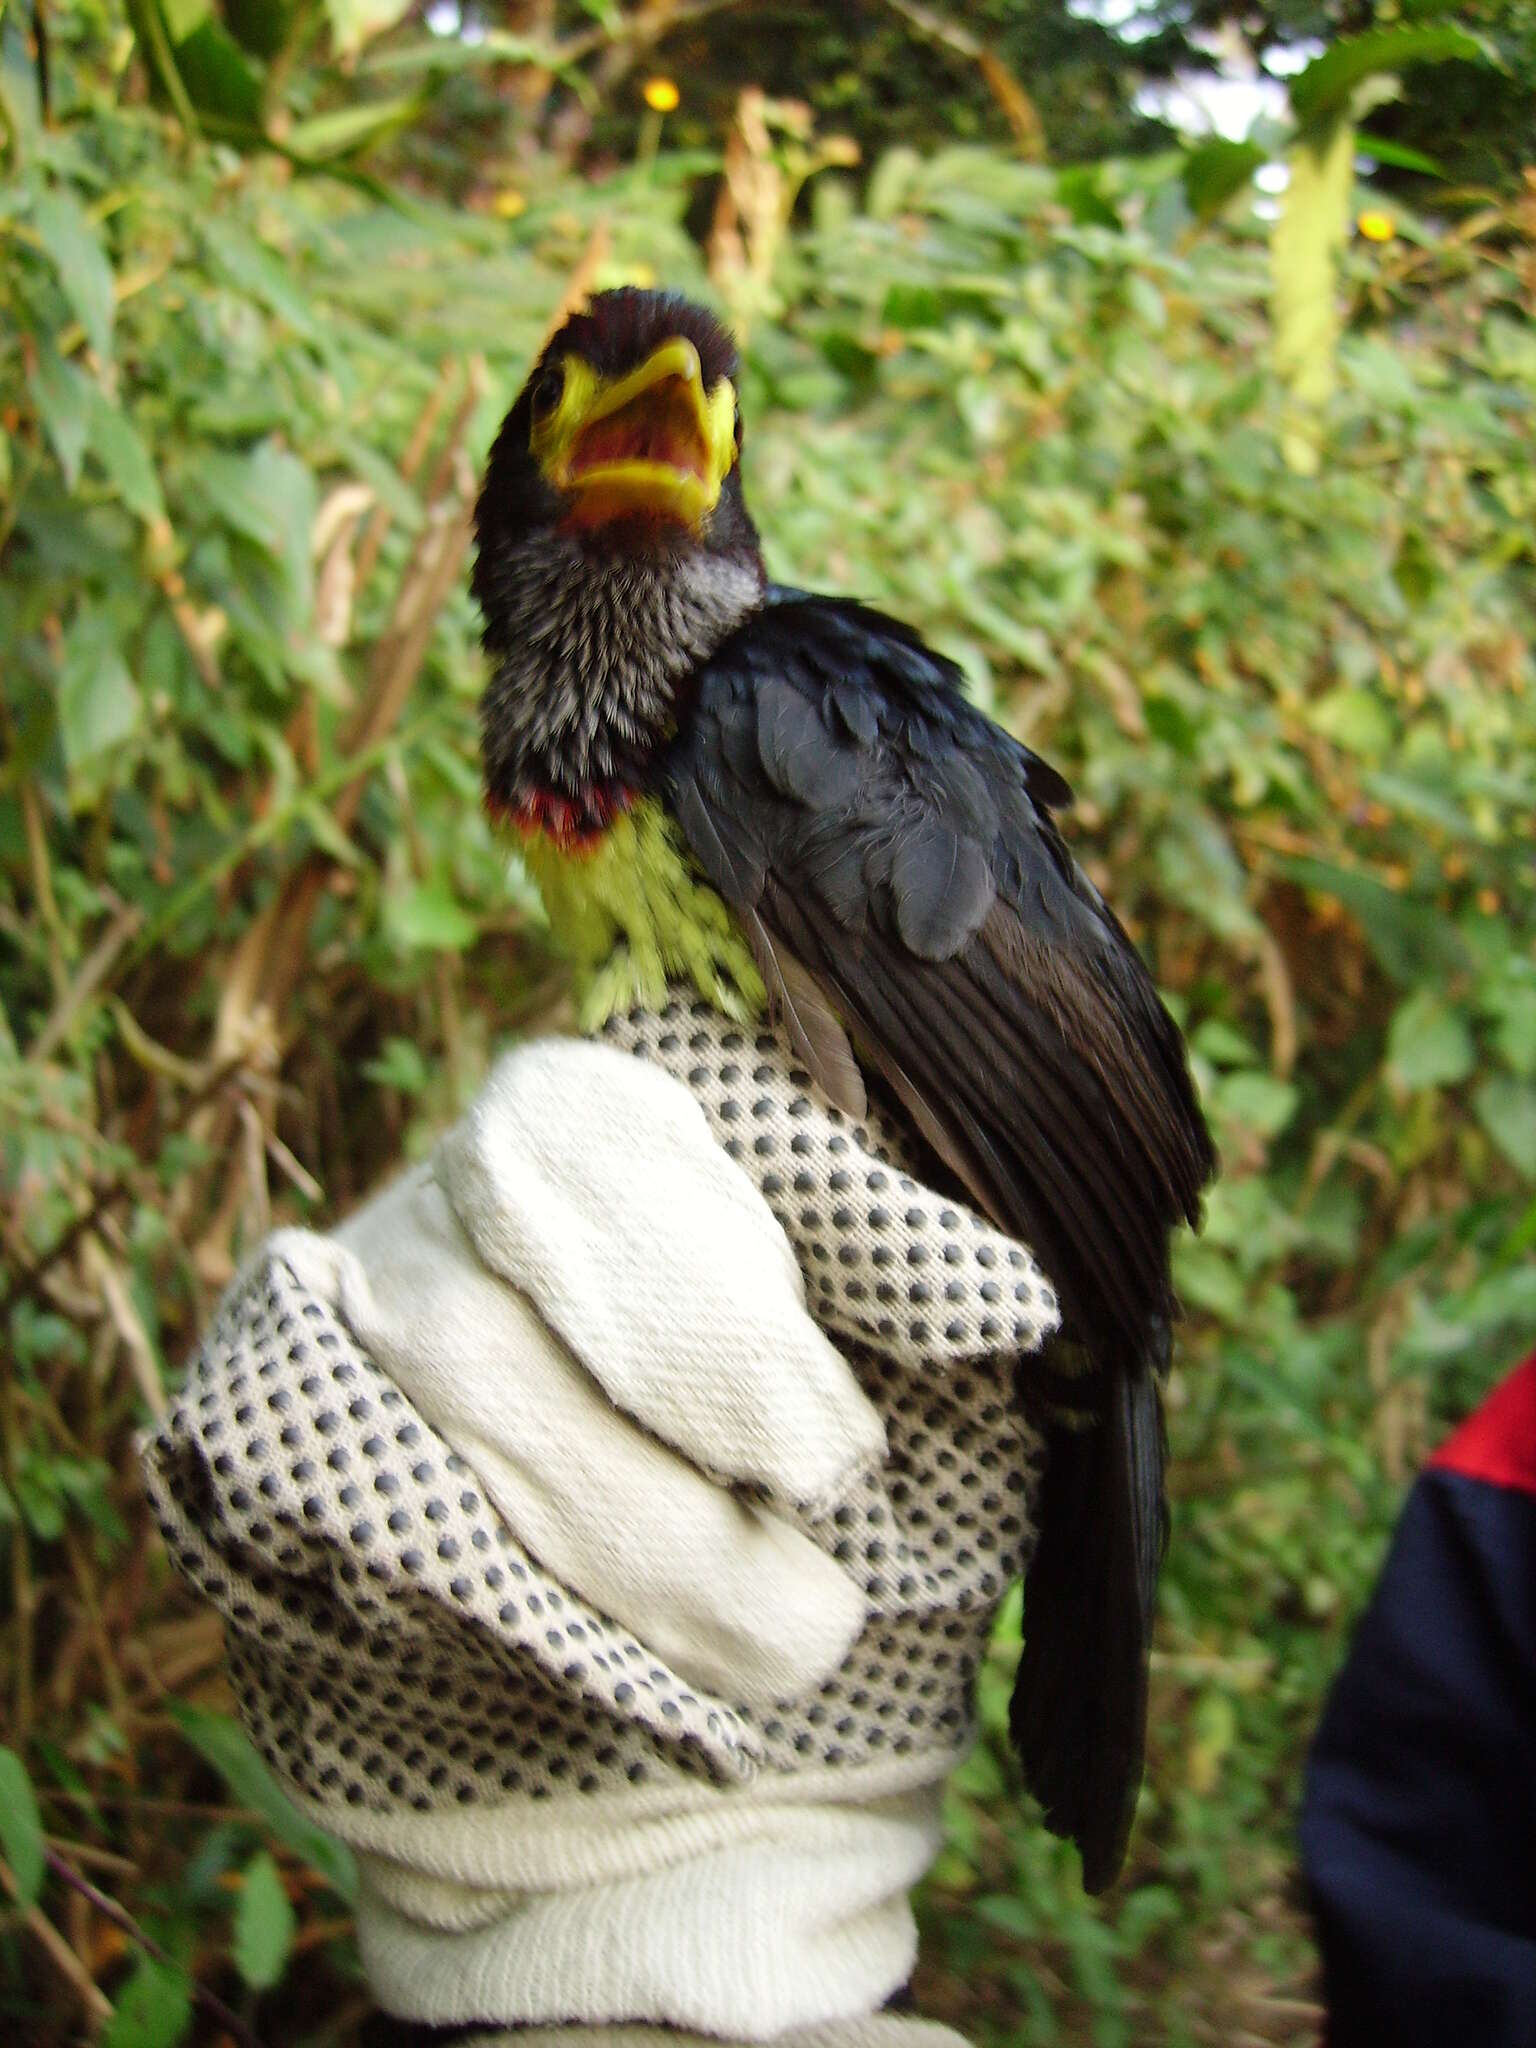 Image of Yellow-billed Barbet